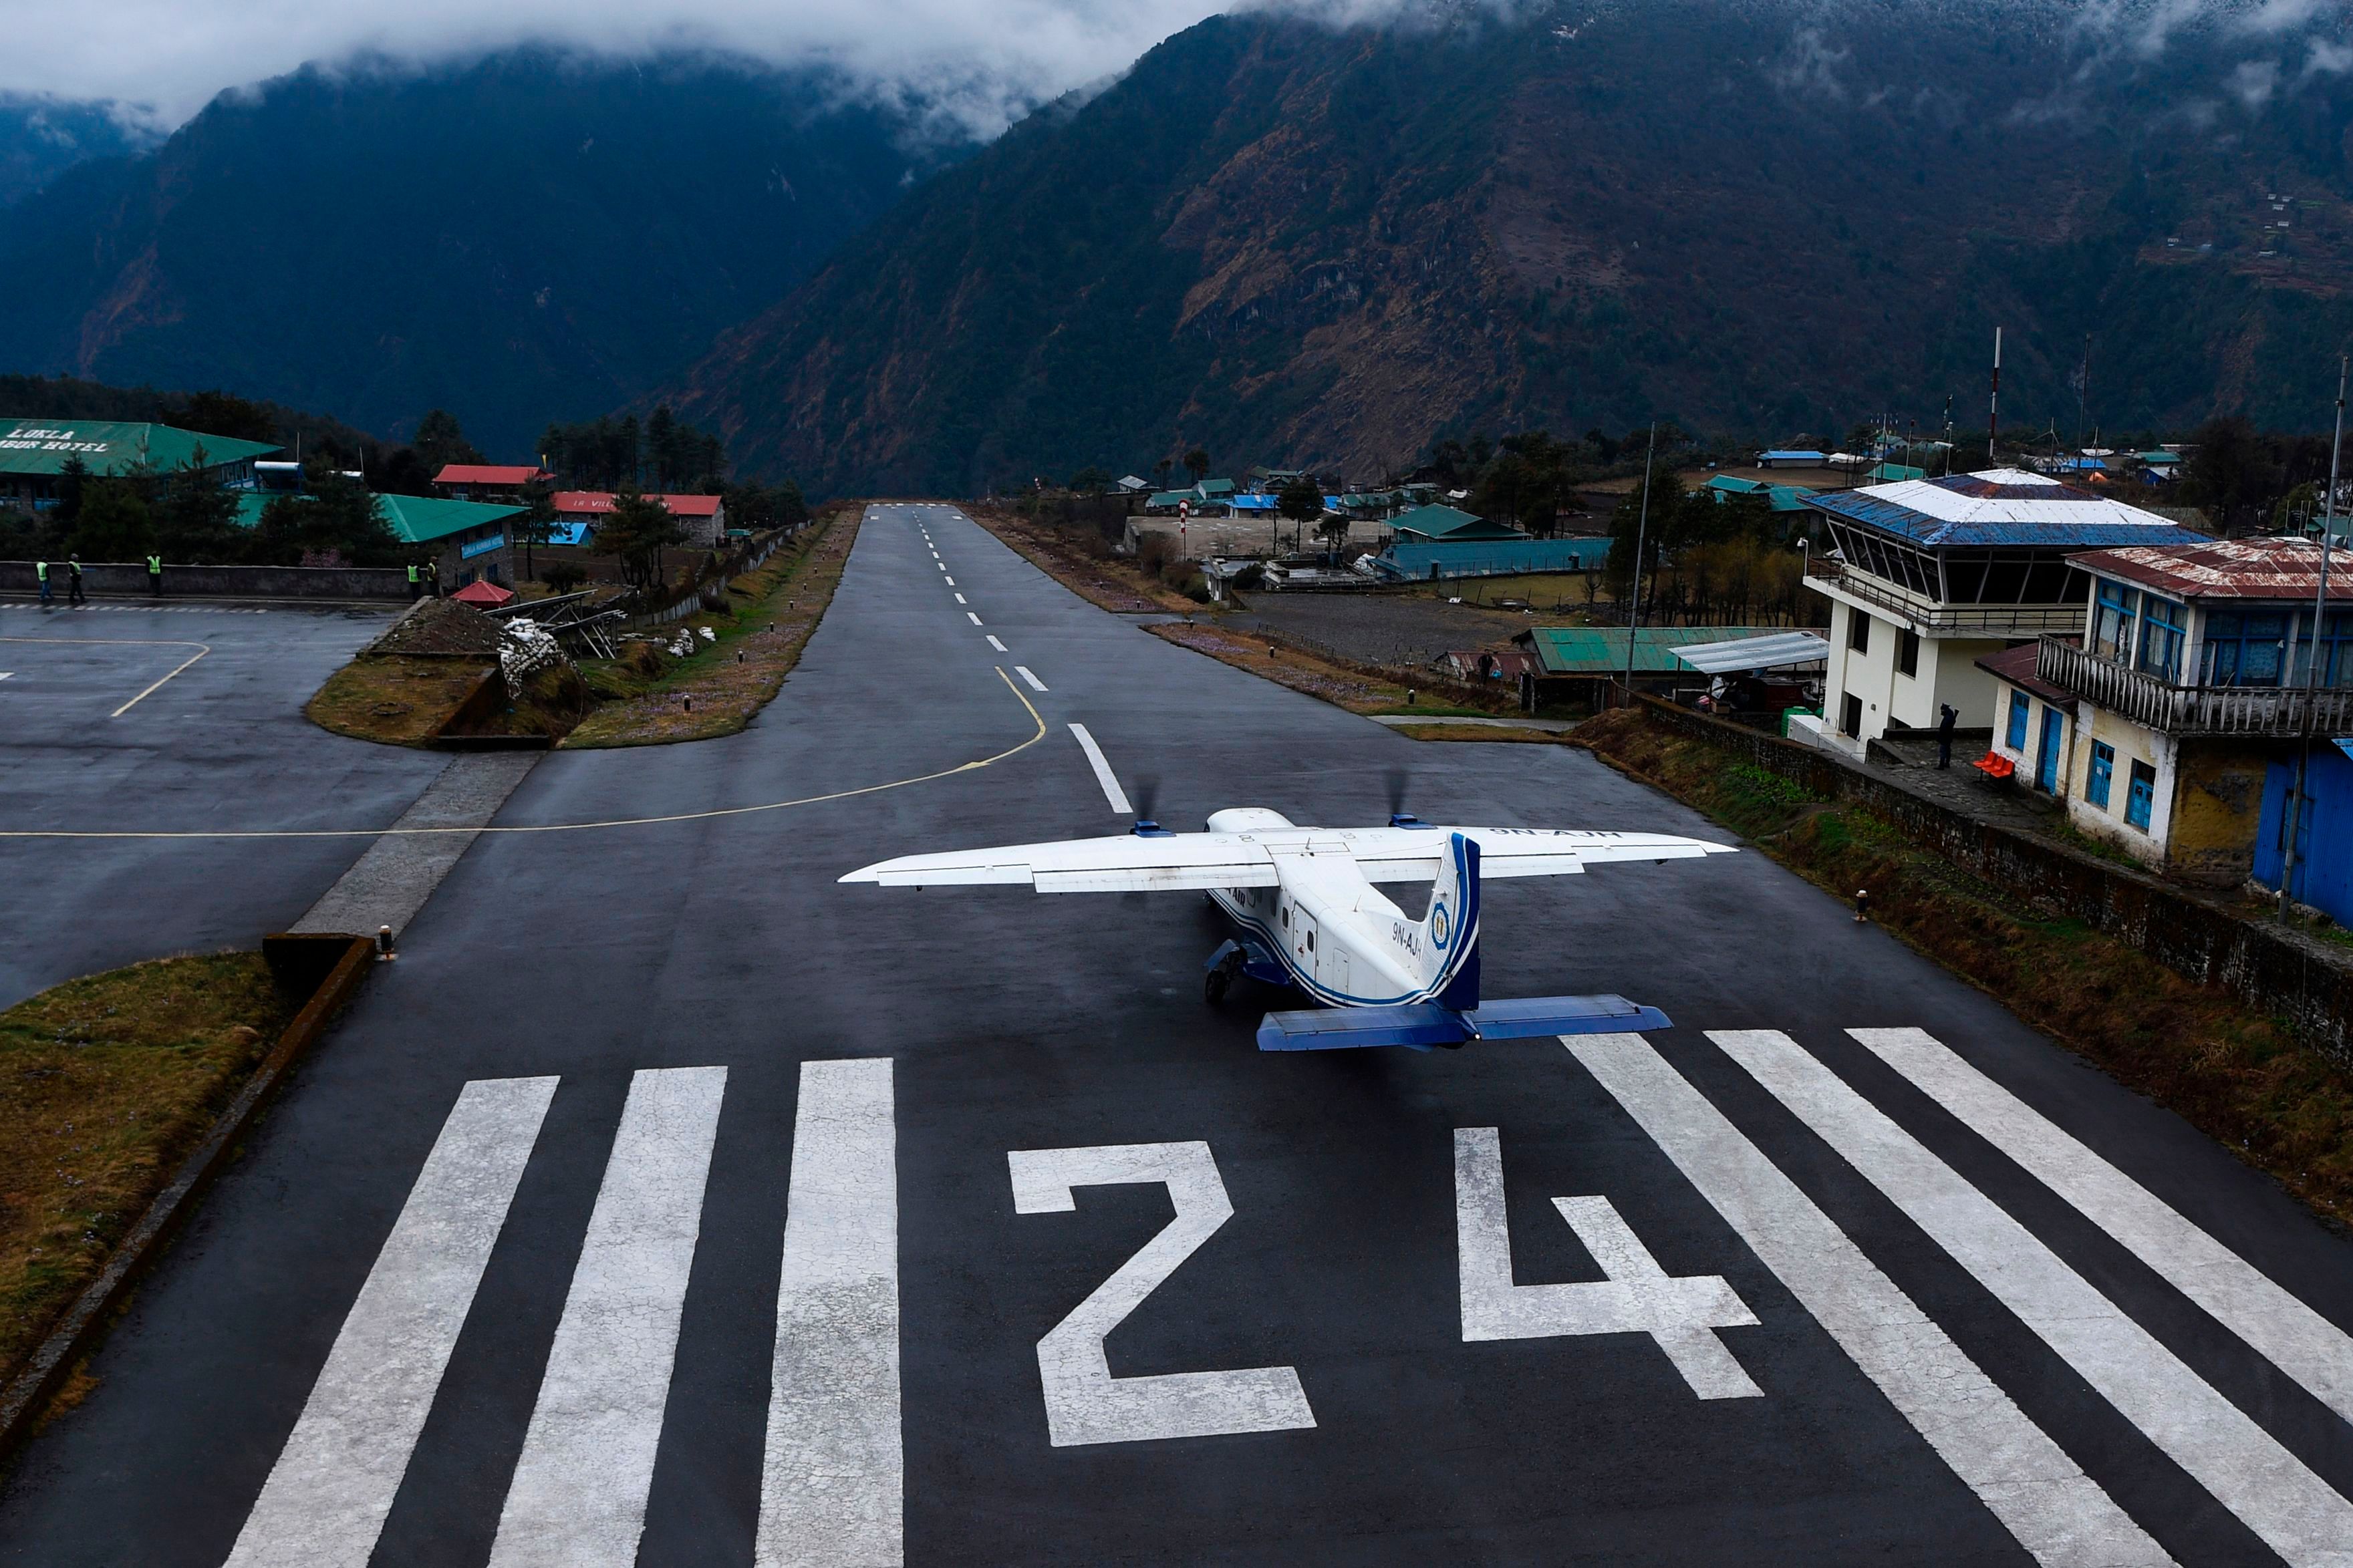 Tenzing-Hillary Airport in Lukla, Nepal Getty Images